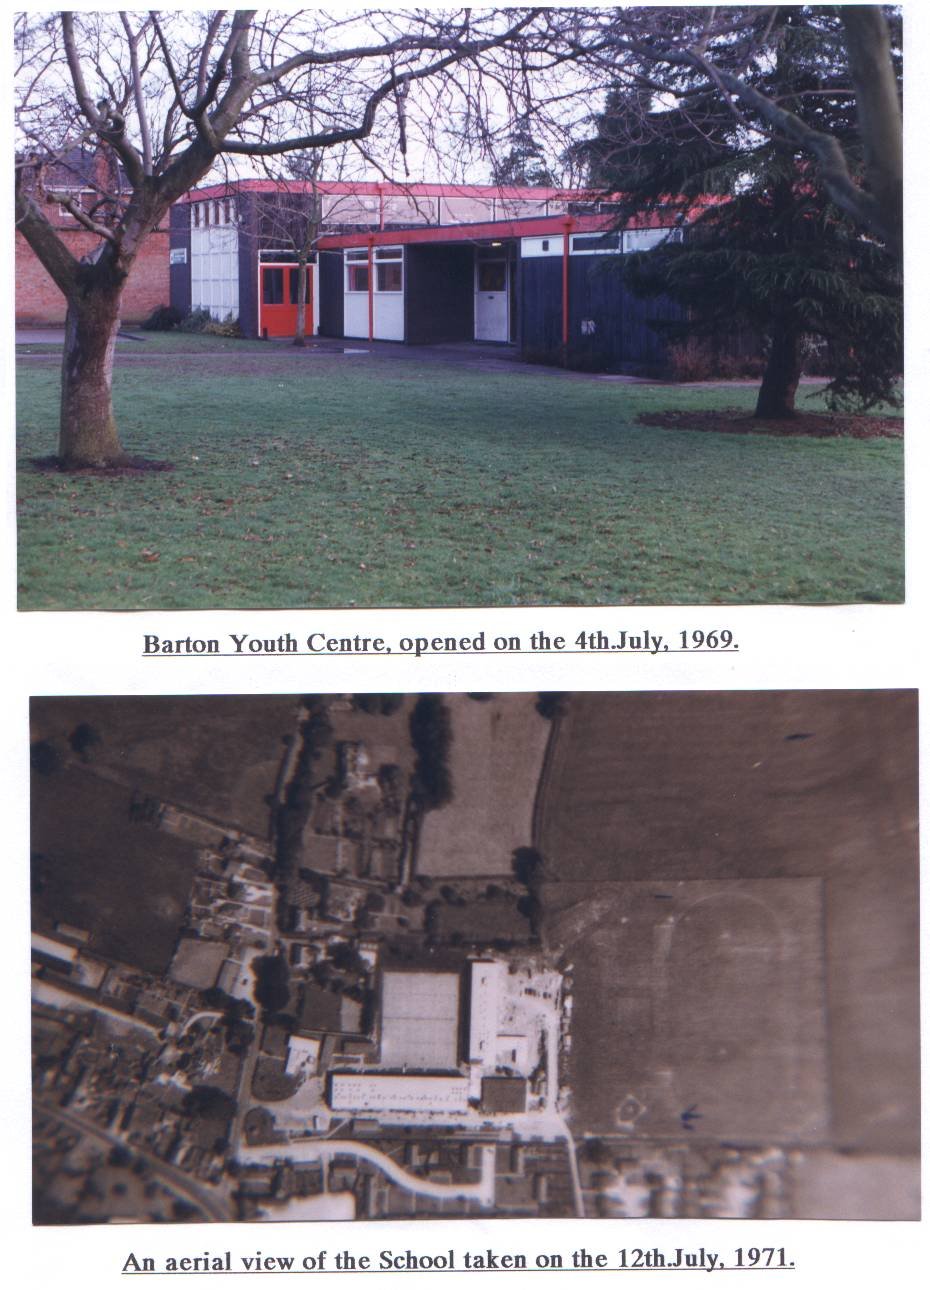 Barton Youth Centre, opened on the 4th July, 1969. An aerial view of the school taken on the 12th July, 1971.